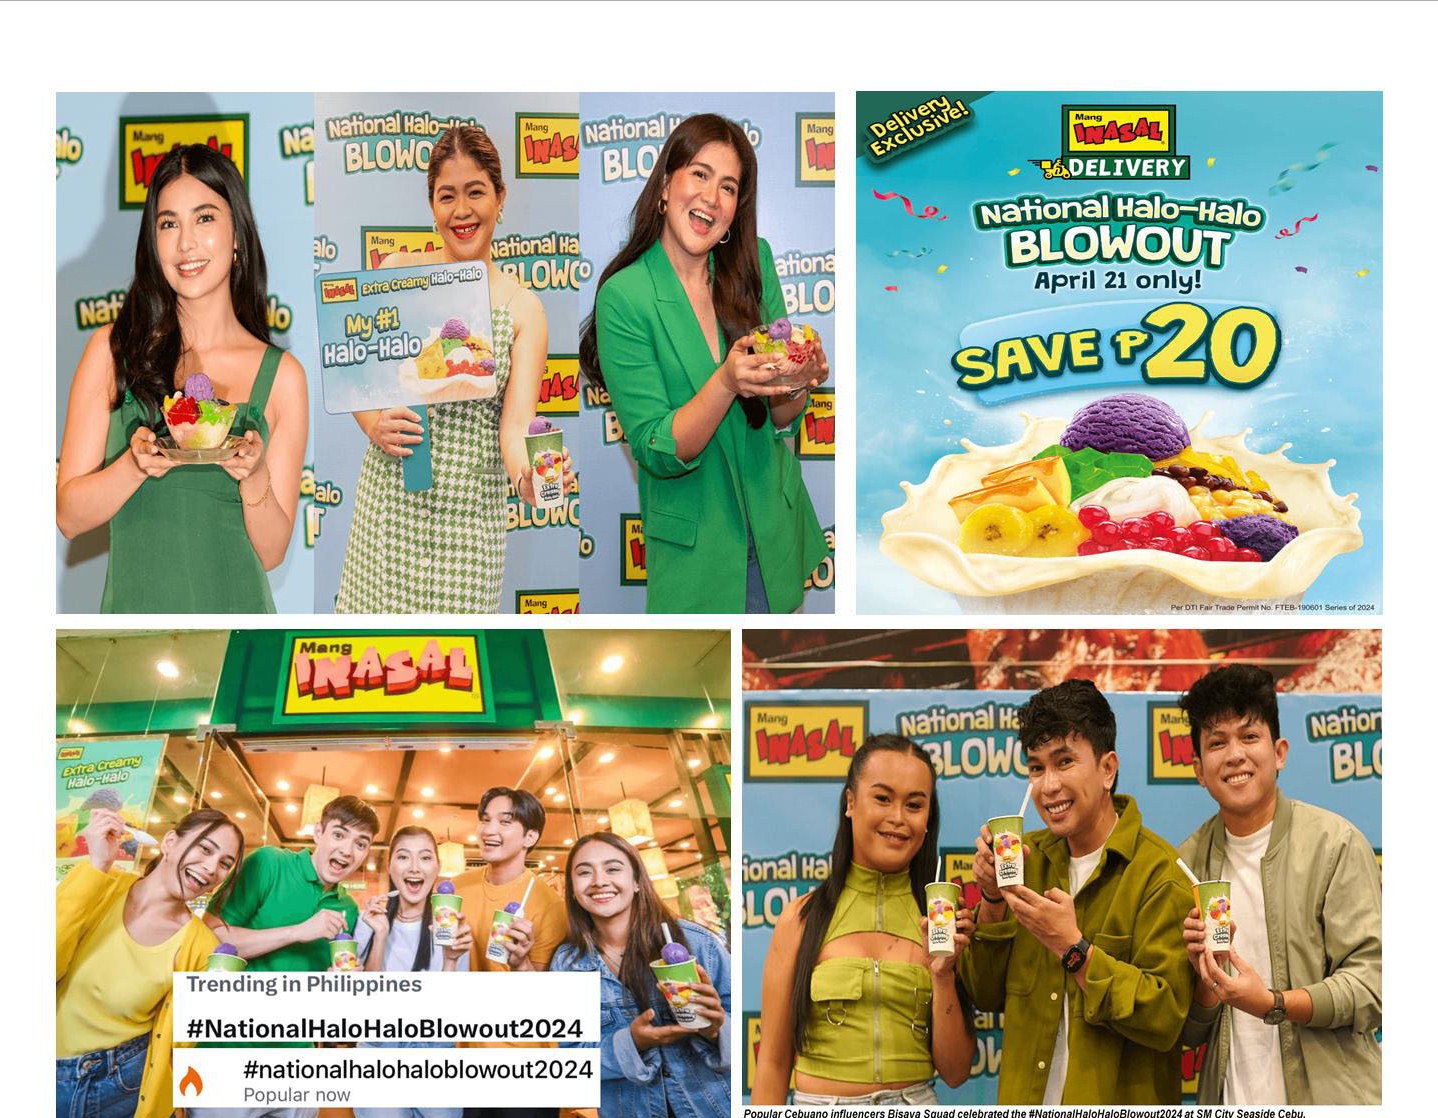 Mang Inasal levels up summer with National Halo-Halo Blowout and back-to-back treats